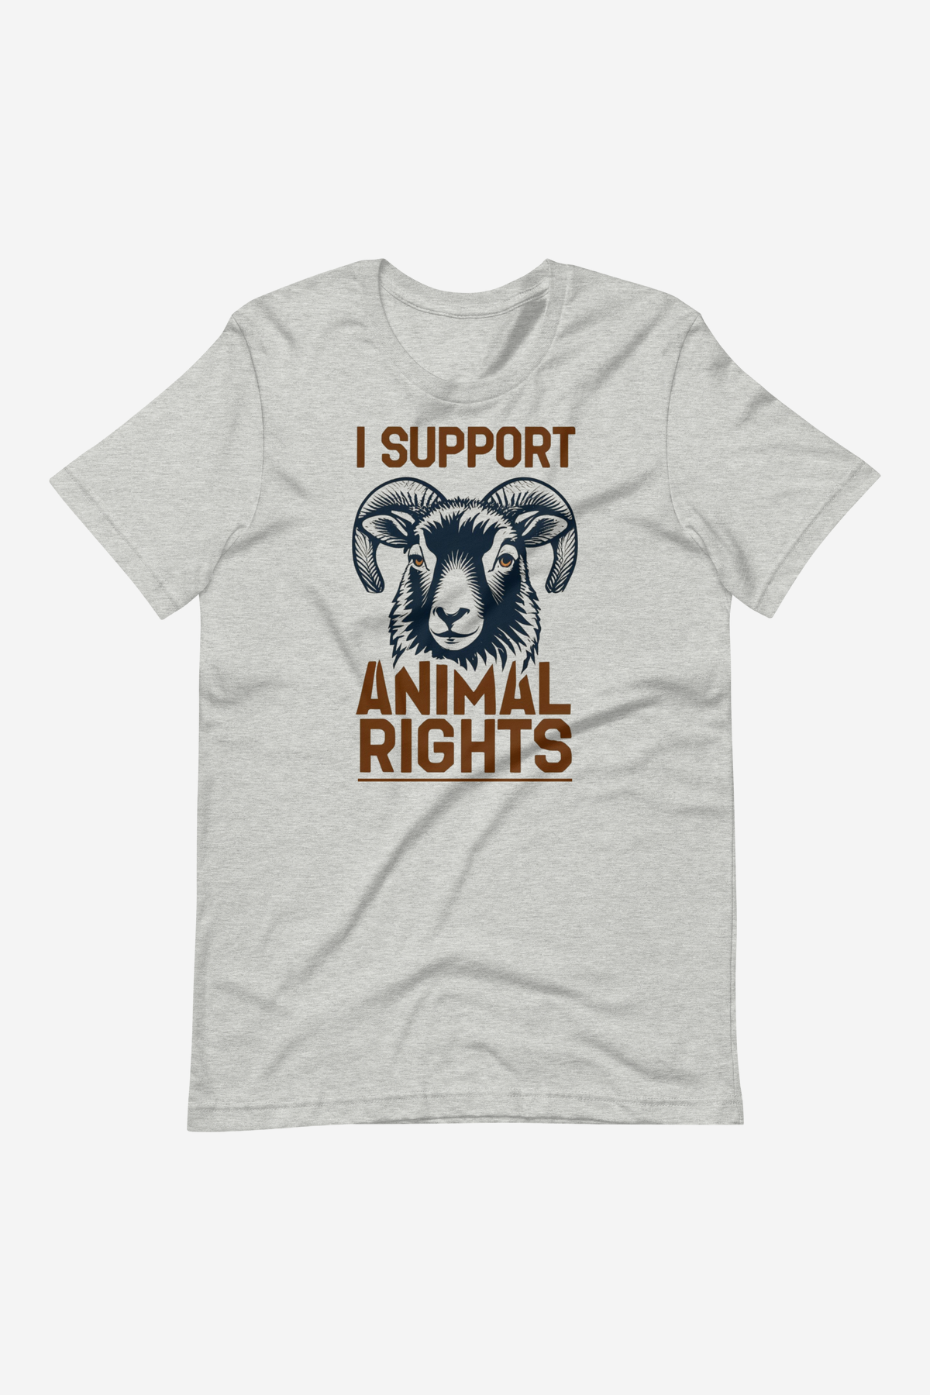 Support Animal Rights Unisex t-shirt